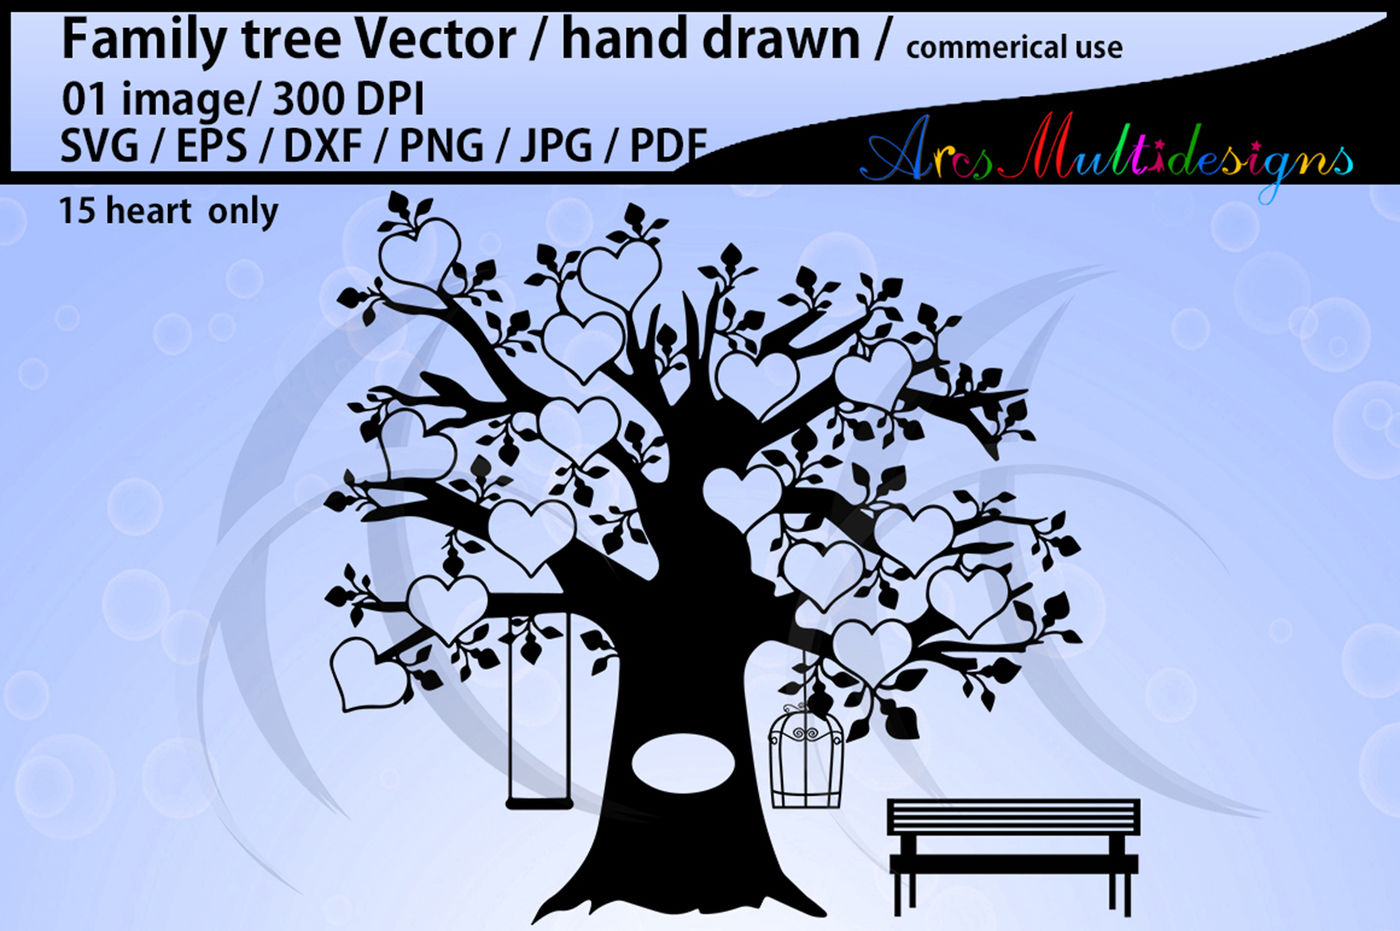 Family Tree Clipart Svg Eps Dxf Png Pdf Family Tree Silhouette By Arcsmultidesignsshop Thehungryjpeg Com